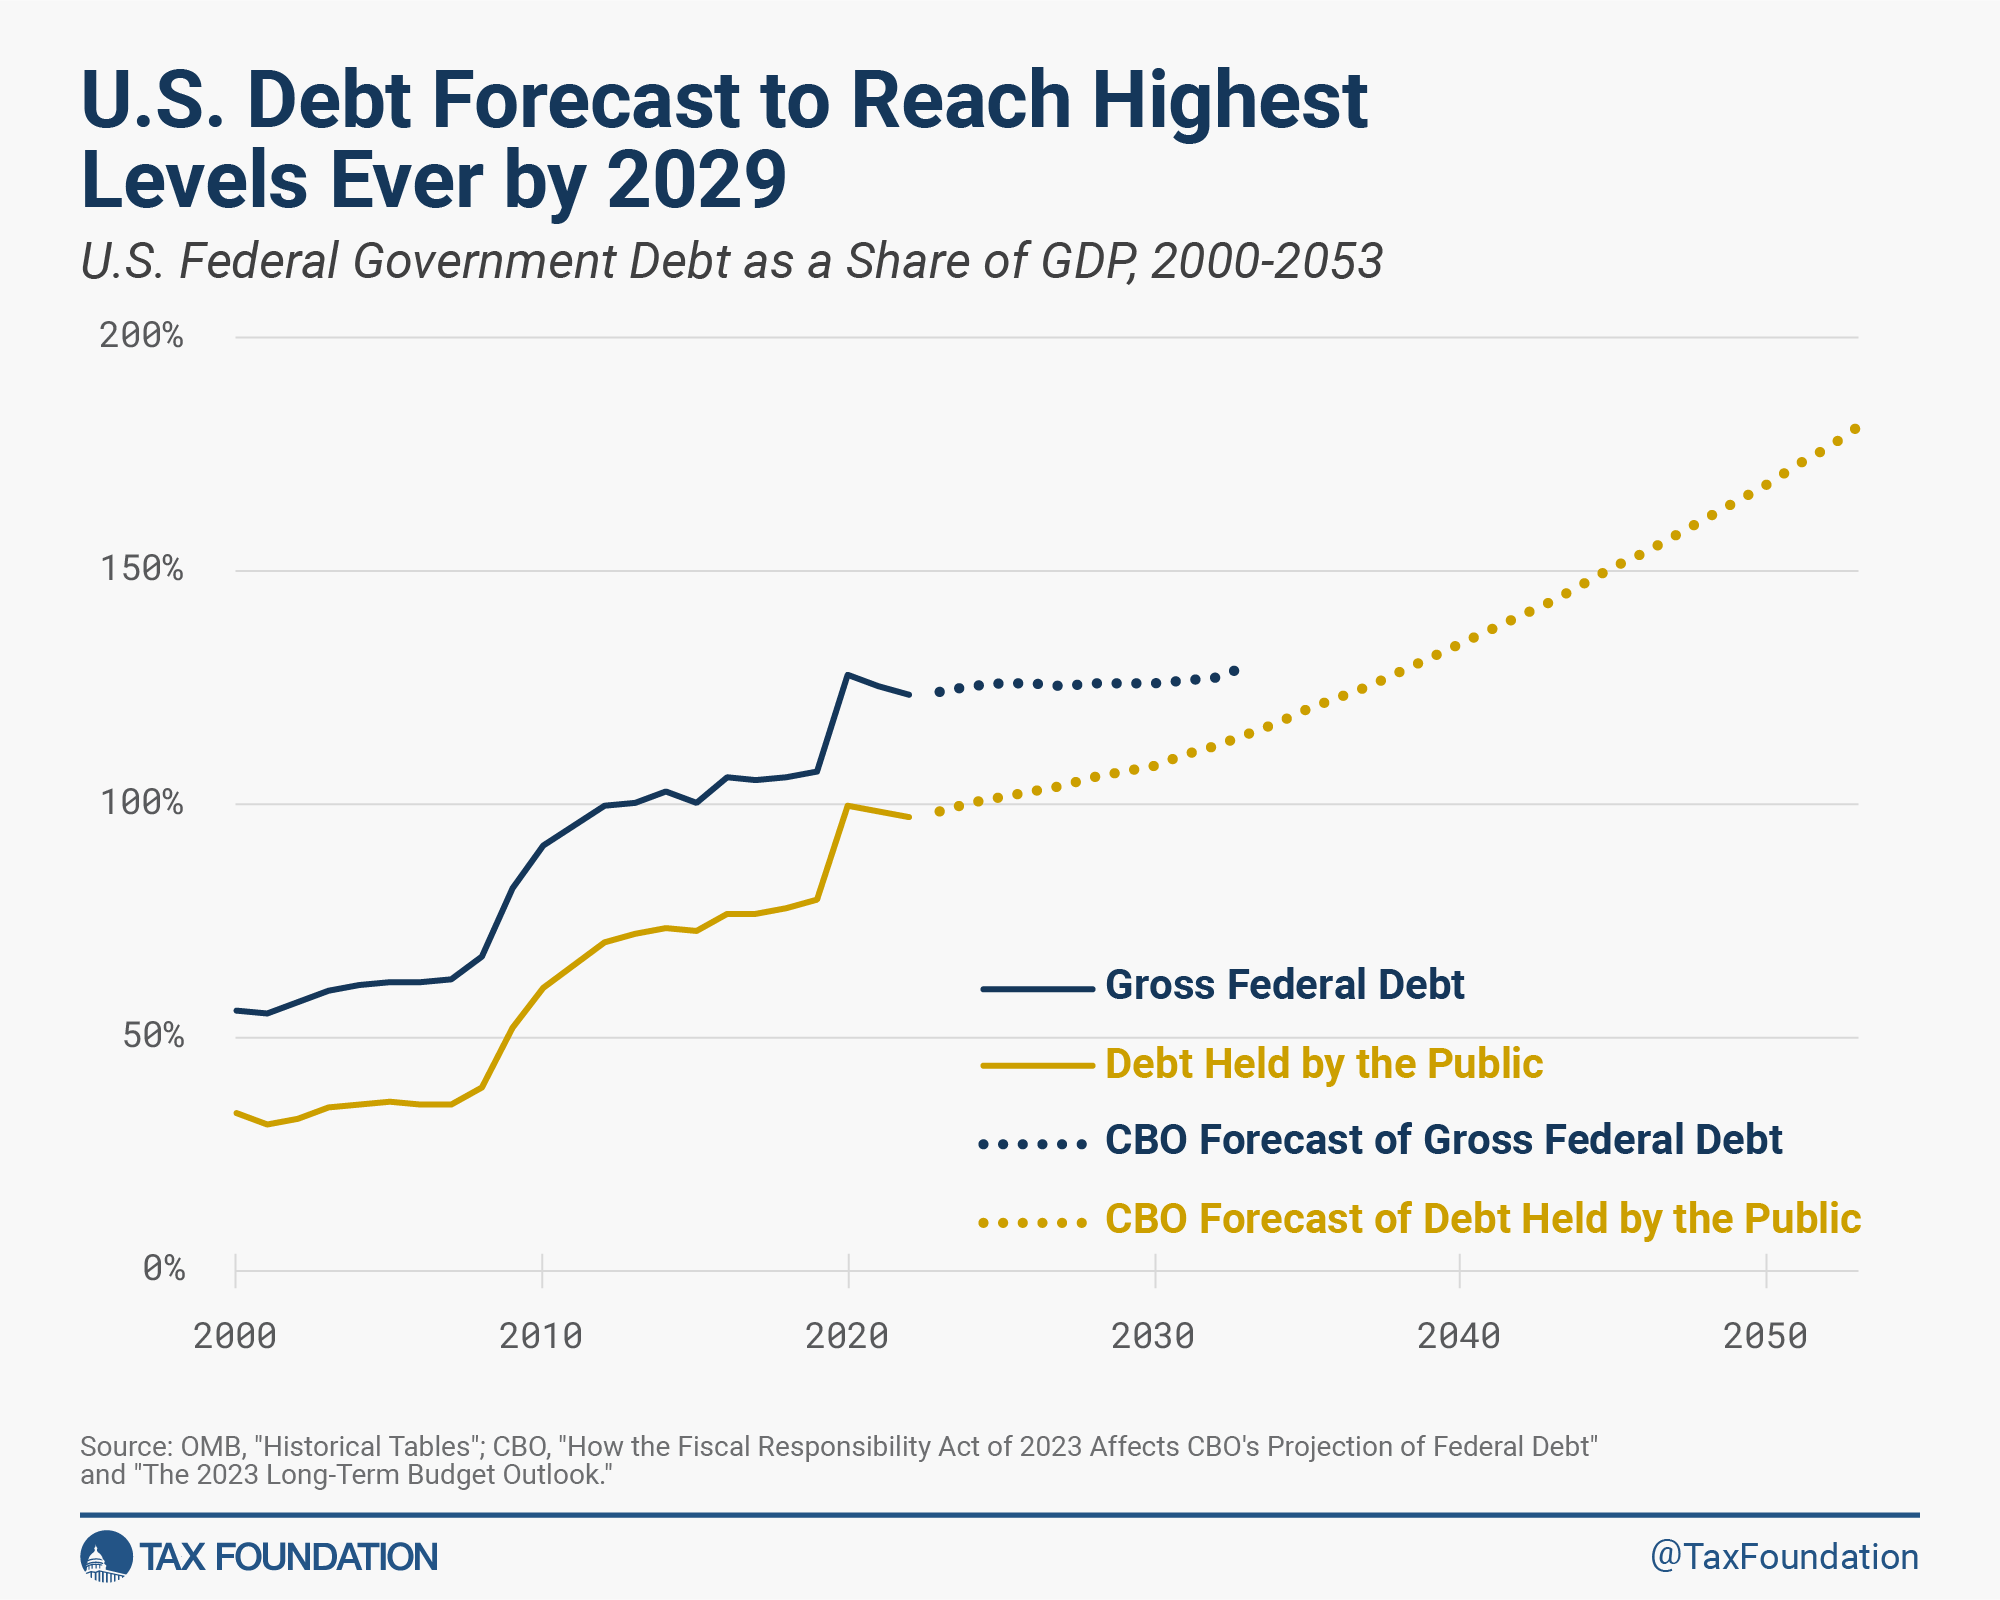 US debt forecast to reach highest levels ever by 2029